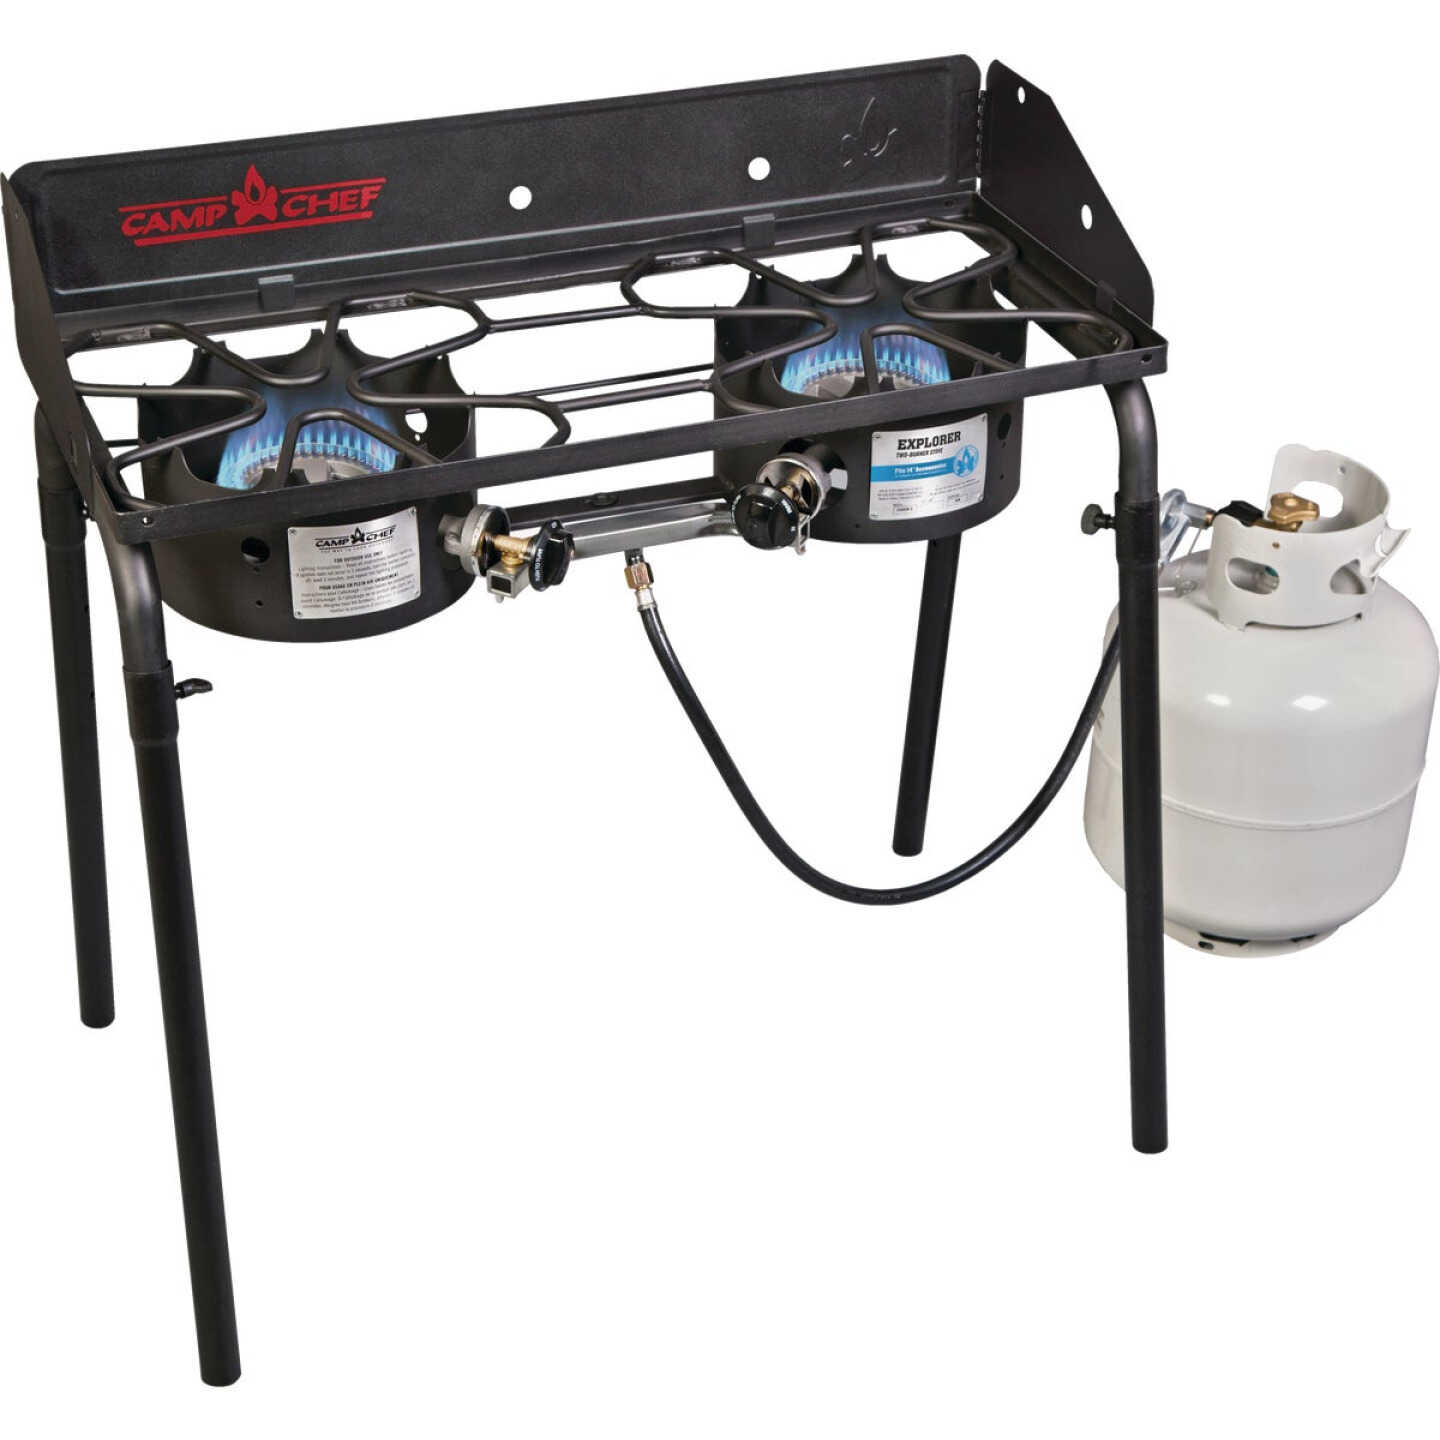 Propane Cooking Stove - Four Wheel Campers